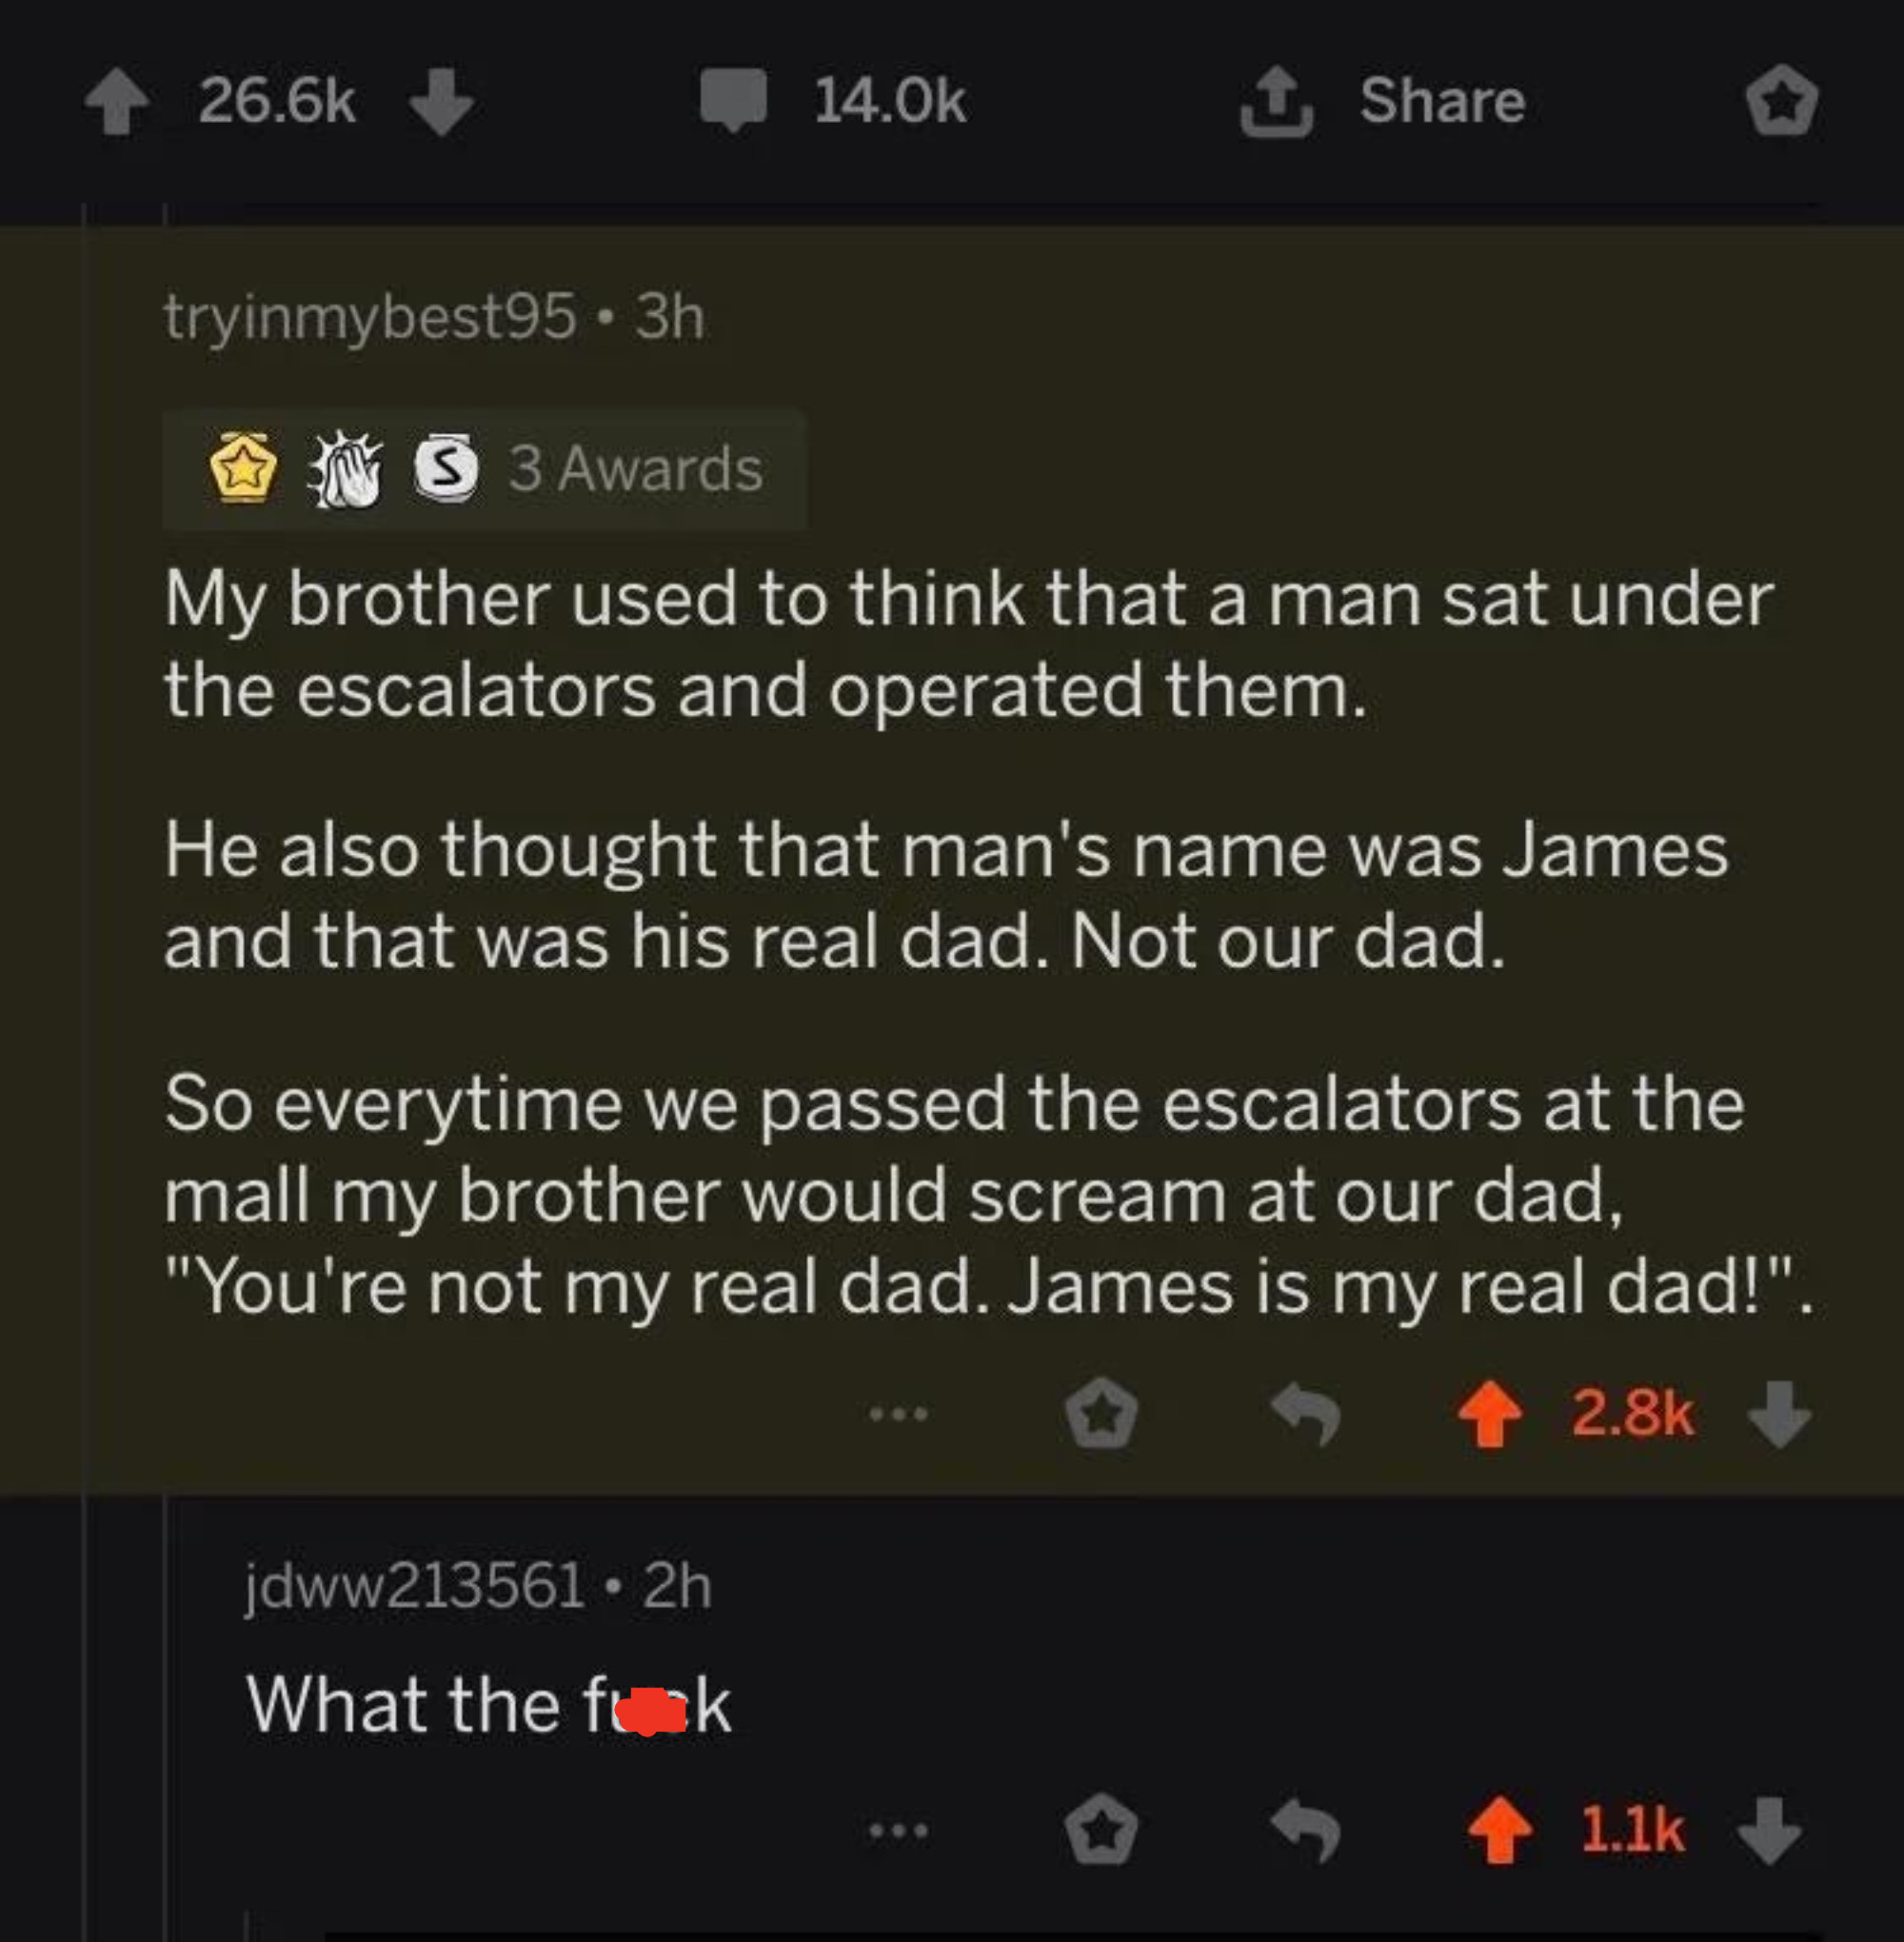 Someone tells a bizarre story about the man his brother thought operated escalators underneath them, and his brother thought he was their real father named James